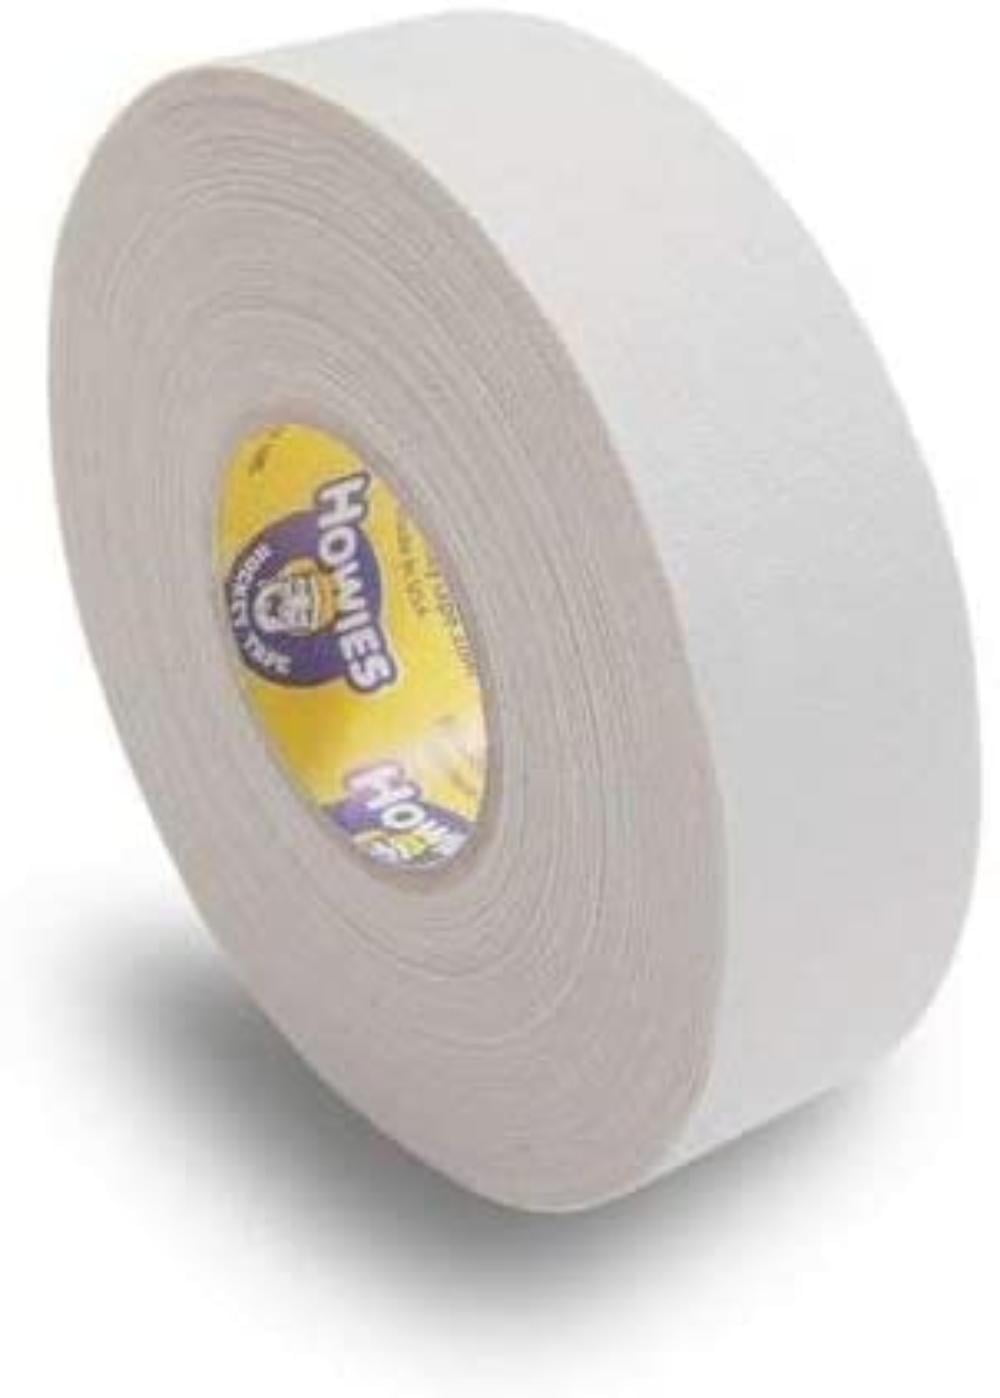 Bulk Hockey Tape Howies Hockey Tape 8 4 and Clear 12 Rolls of White 